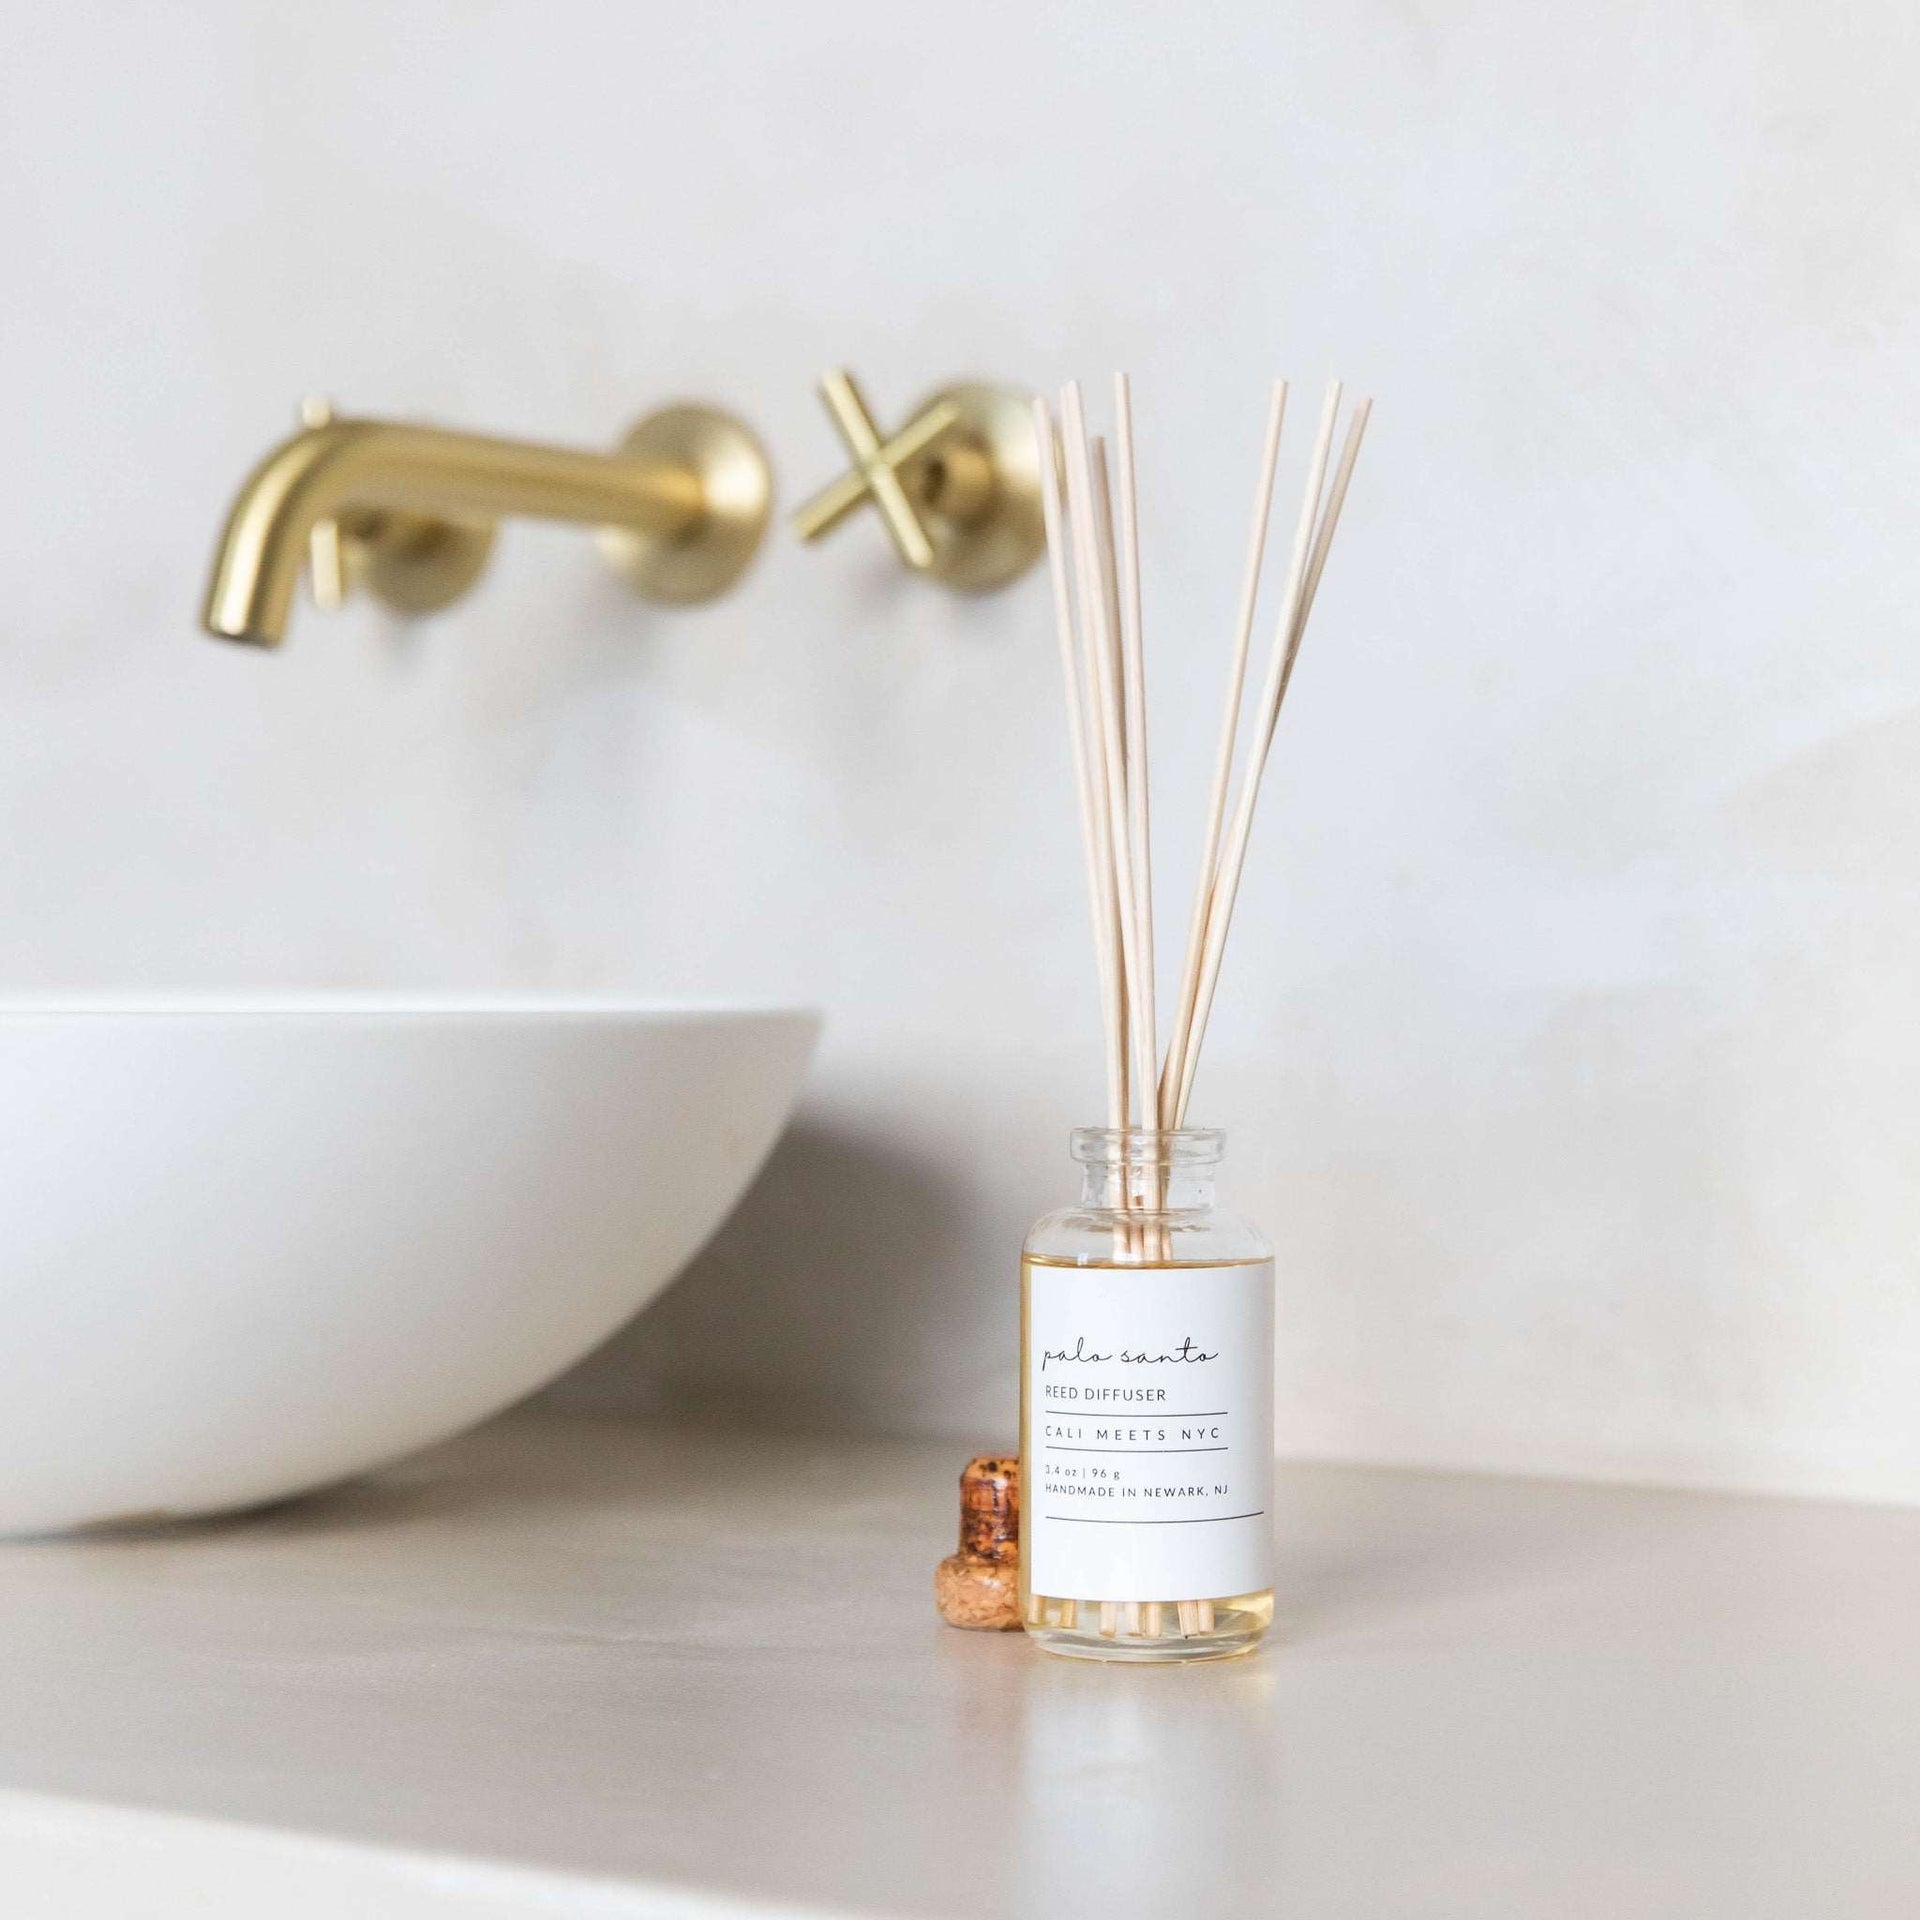 Pacific Surf - Reed DIffuser – Cali Vibes Candle Company